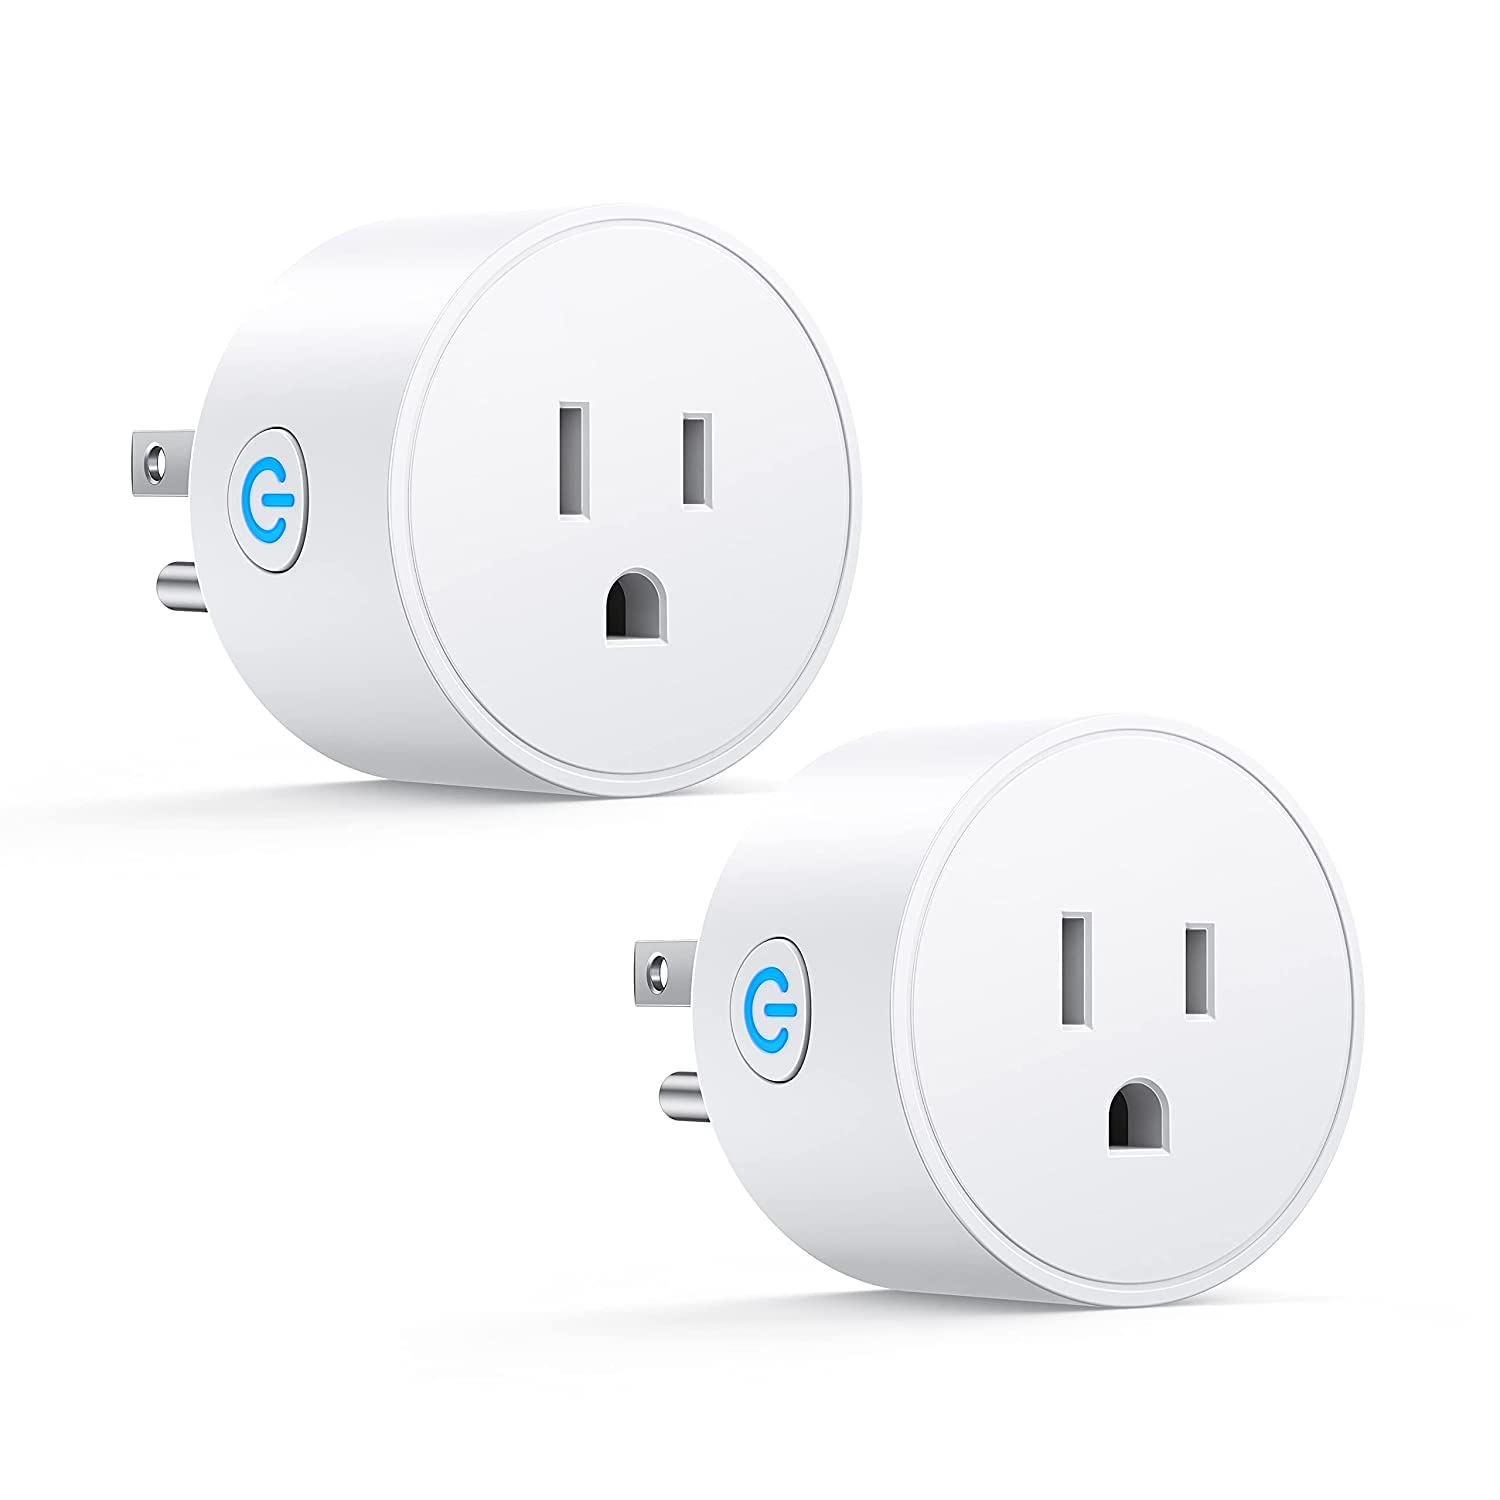 Smart Plug Support Smart Life, Siri, SmartThings, Alexa Google Assistant for Voice Control, Remote Control, Timer, Mini Smart Outlet,No Hub Required,FCC ETL Certified